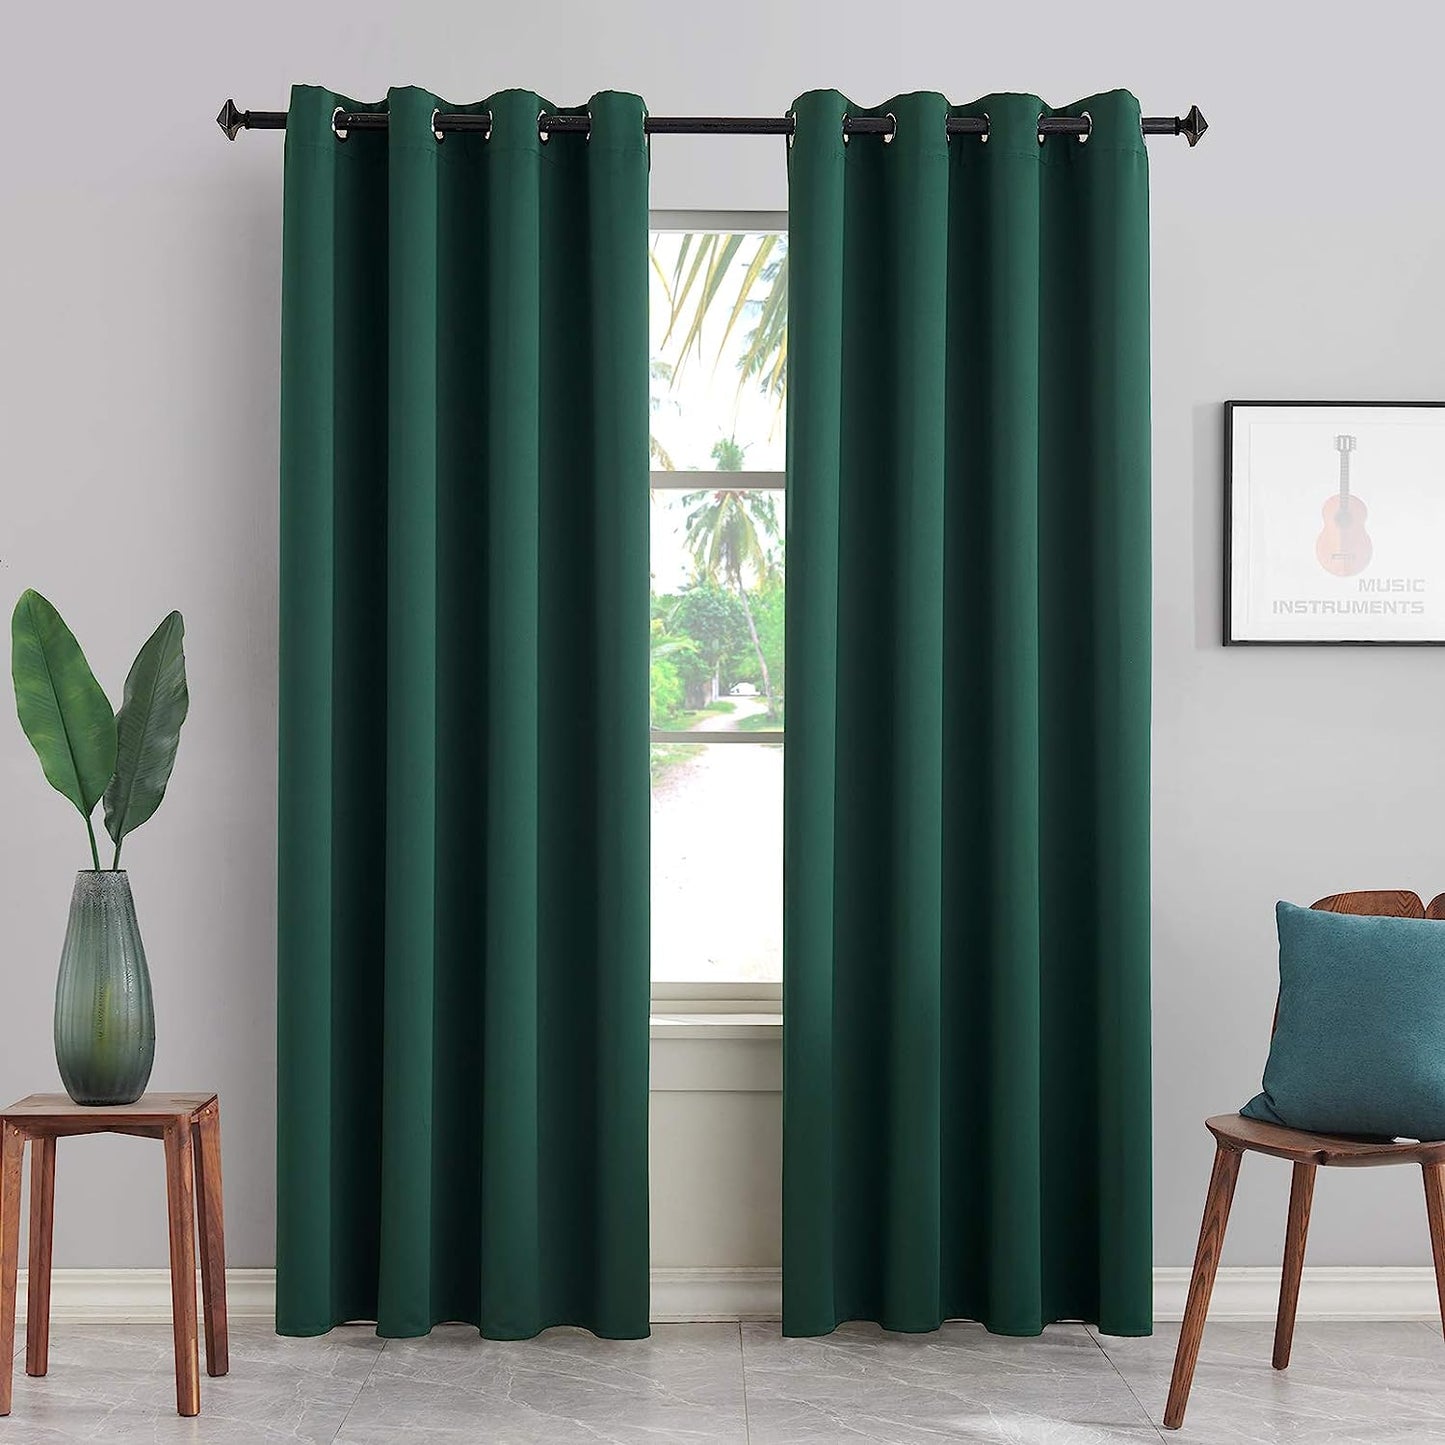 BERSWAY 99% Blackout Curtains & Drapes Panels 84 Inches Darkening Curtains - Thermal Insulated Curtain for Bedroom-Red 84 Inches Long Grommet Window Curtain 2 Panels Set,W 52" X L 84"  BERSWAY Dark Green 52"Wx63"L 